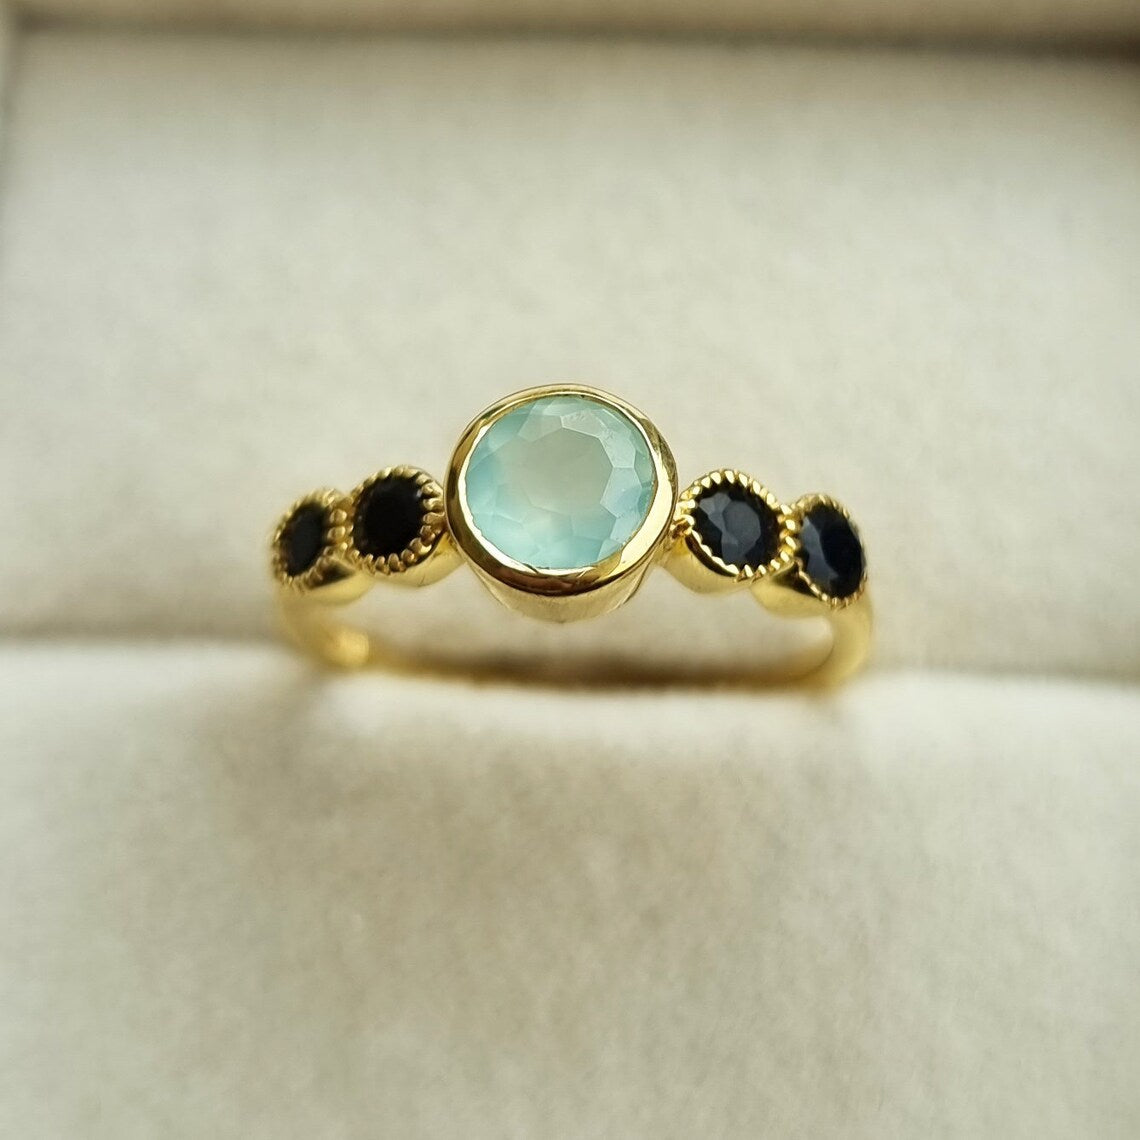 Aqua Chalcedony Black Onyx 925 Sterling Silver Ring with Gold Plating - Round Onyx Ring - Gemstone Ring Handmade